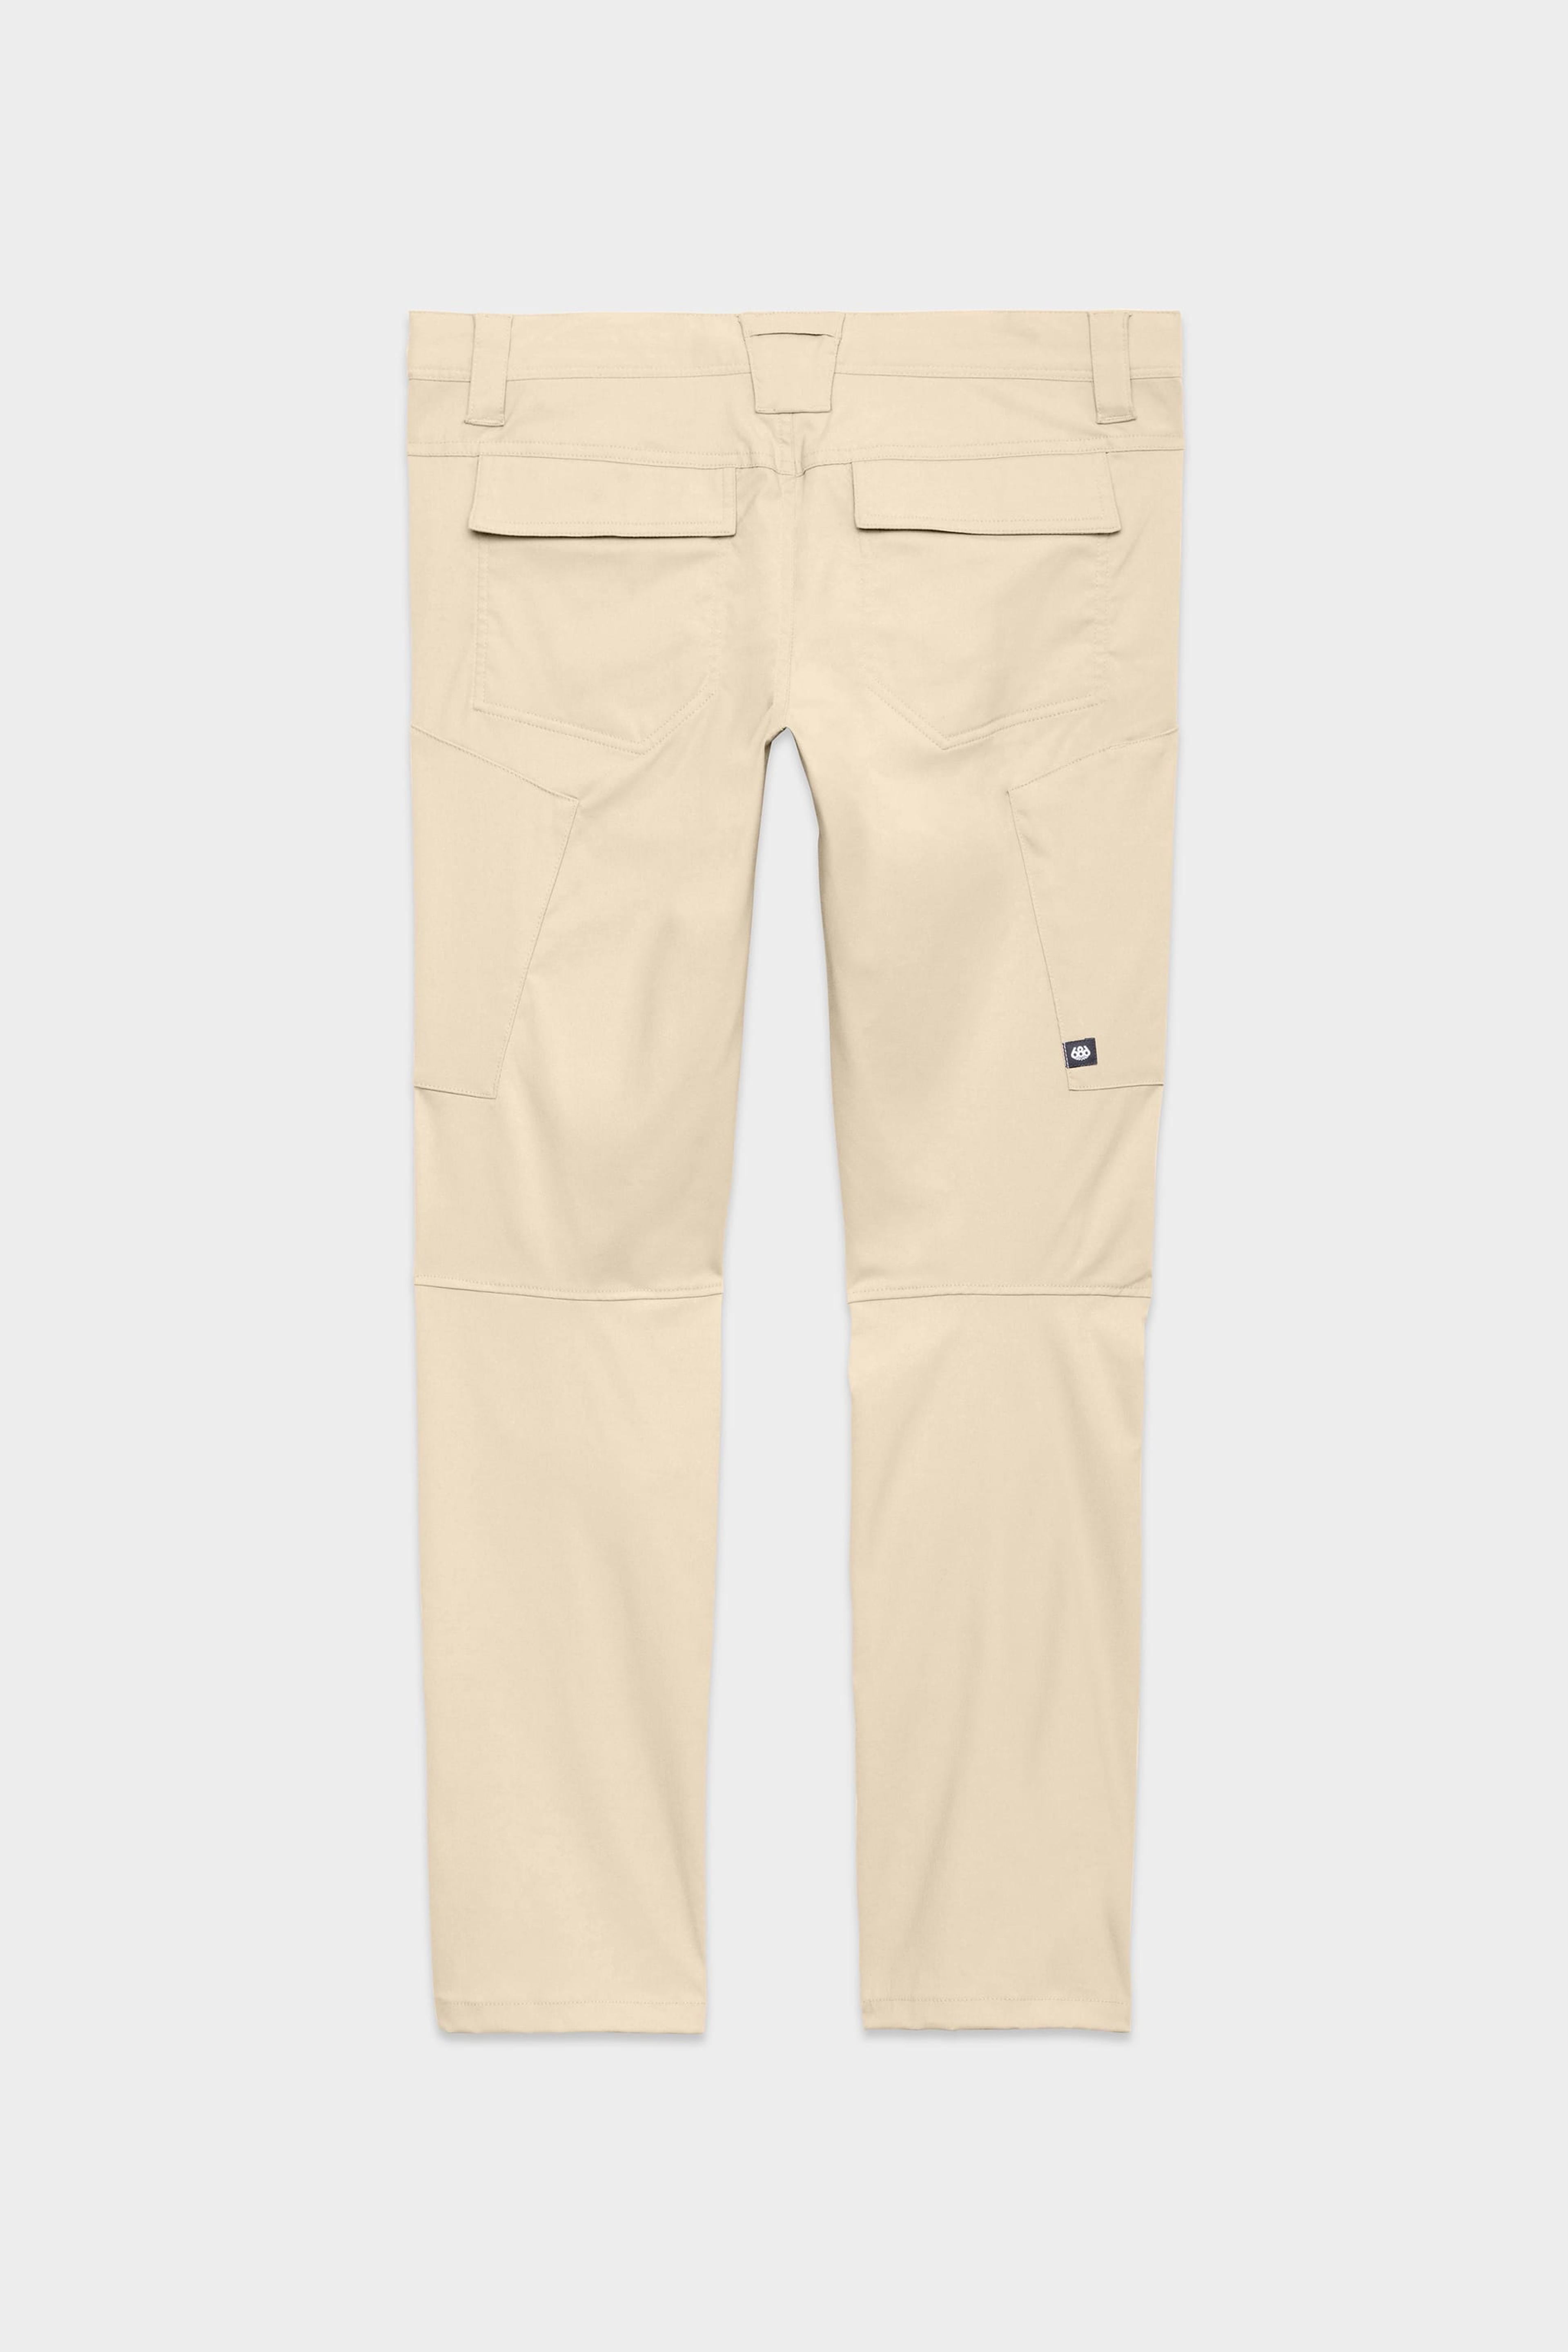 Alternate View 84 of 686 Men's Anything Cargo Pant - Slim Fit